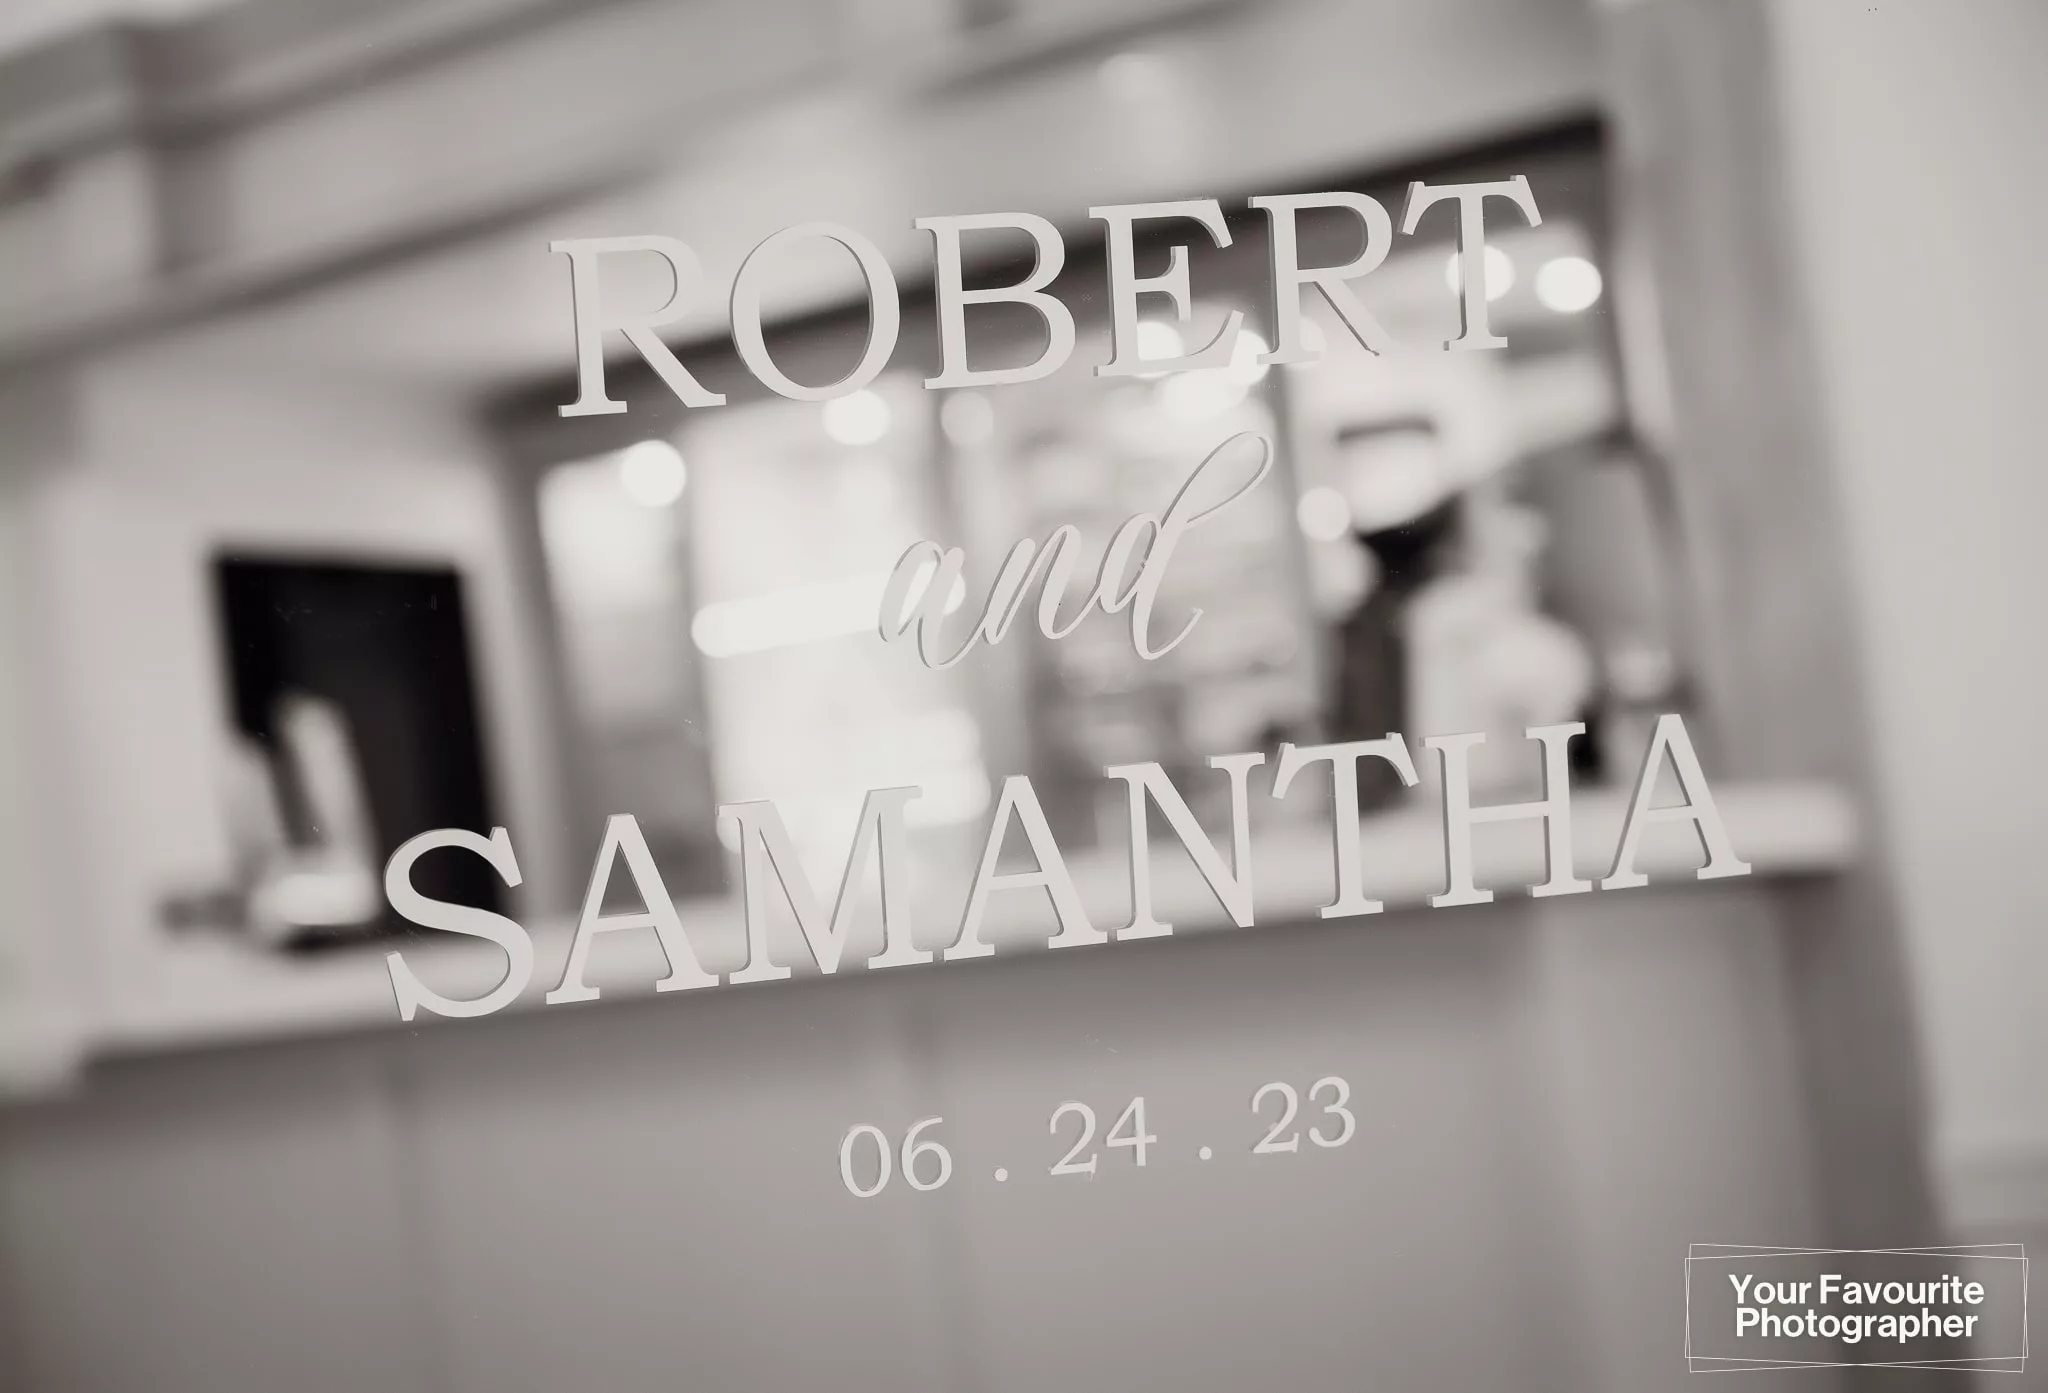 Mirror engraved with "Robert and Samantha"